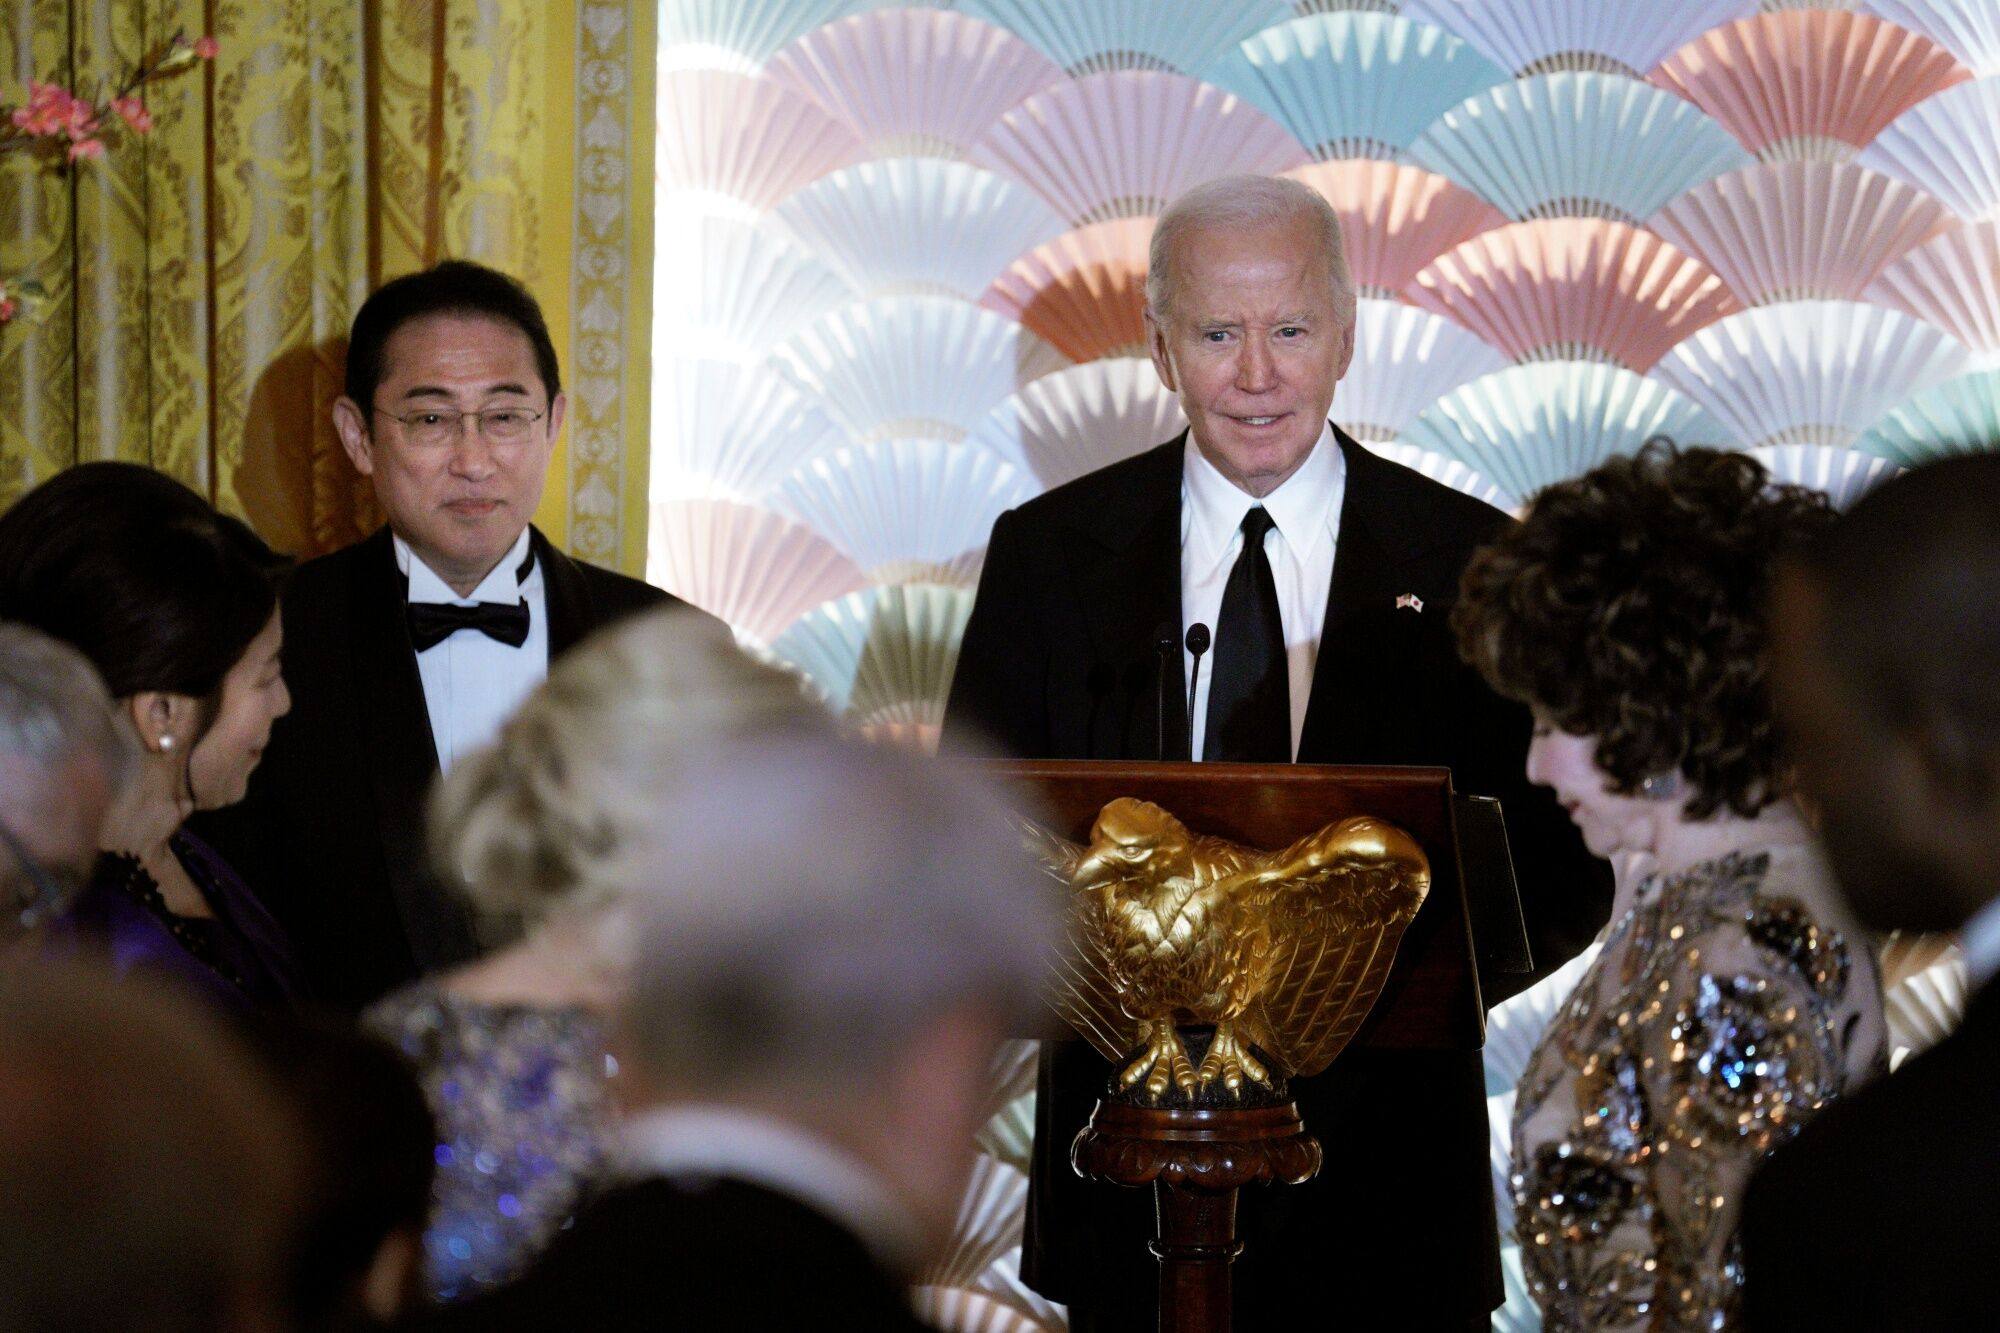 Fumio Kishida, Japan’s prime minister, and US President Joe Biden during a state dinner in the East Room of the White House on Wednesday. Photo: Bloomberg